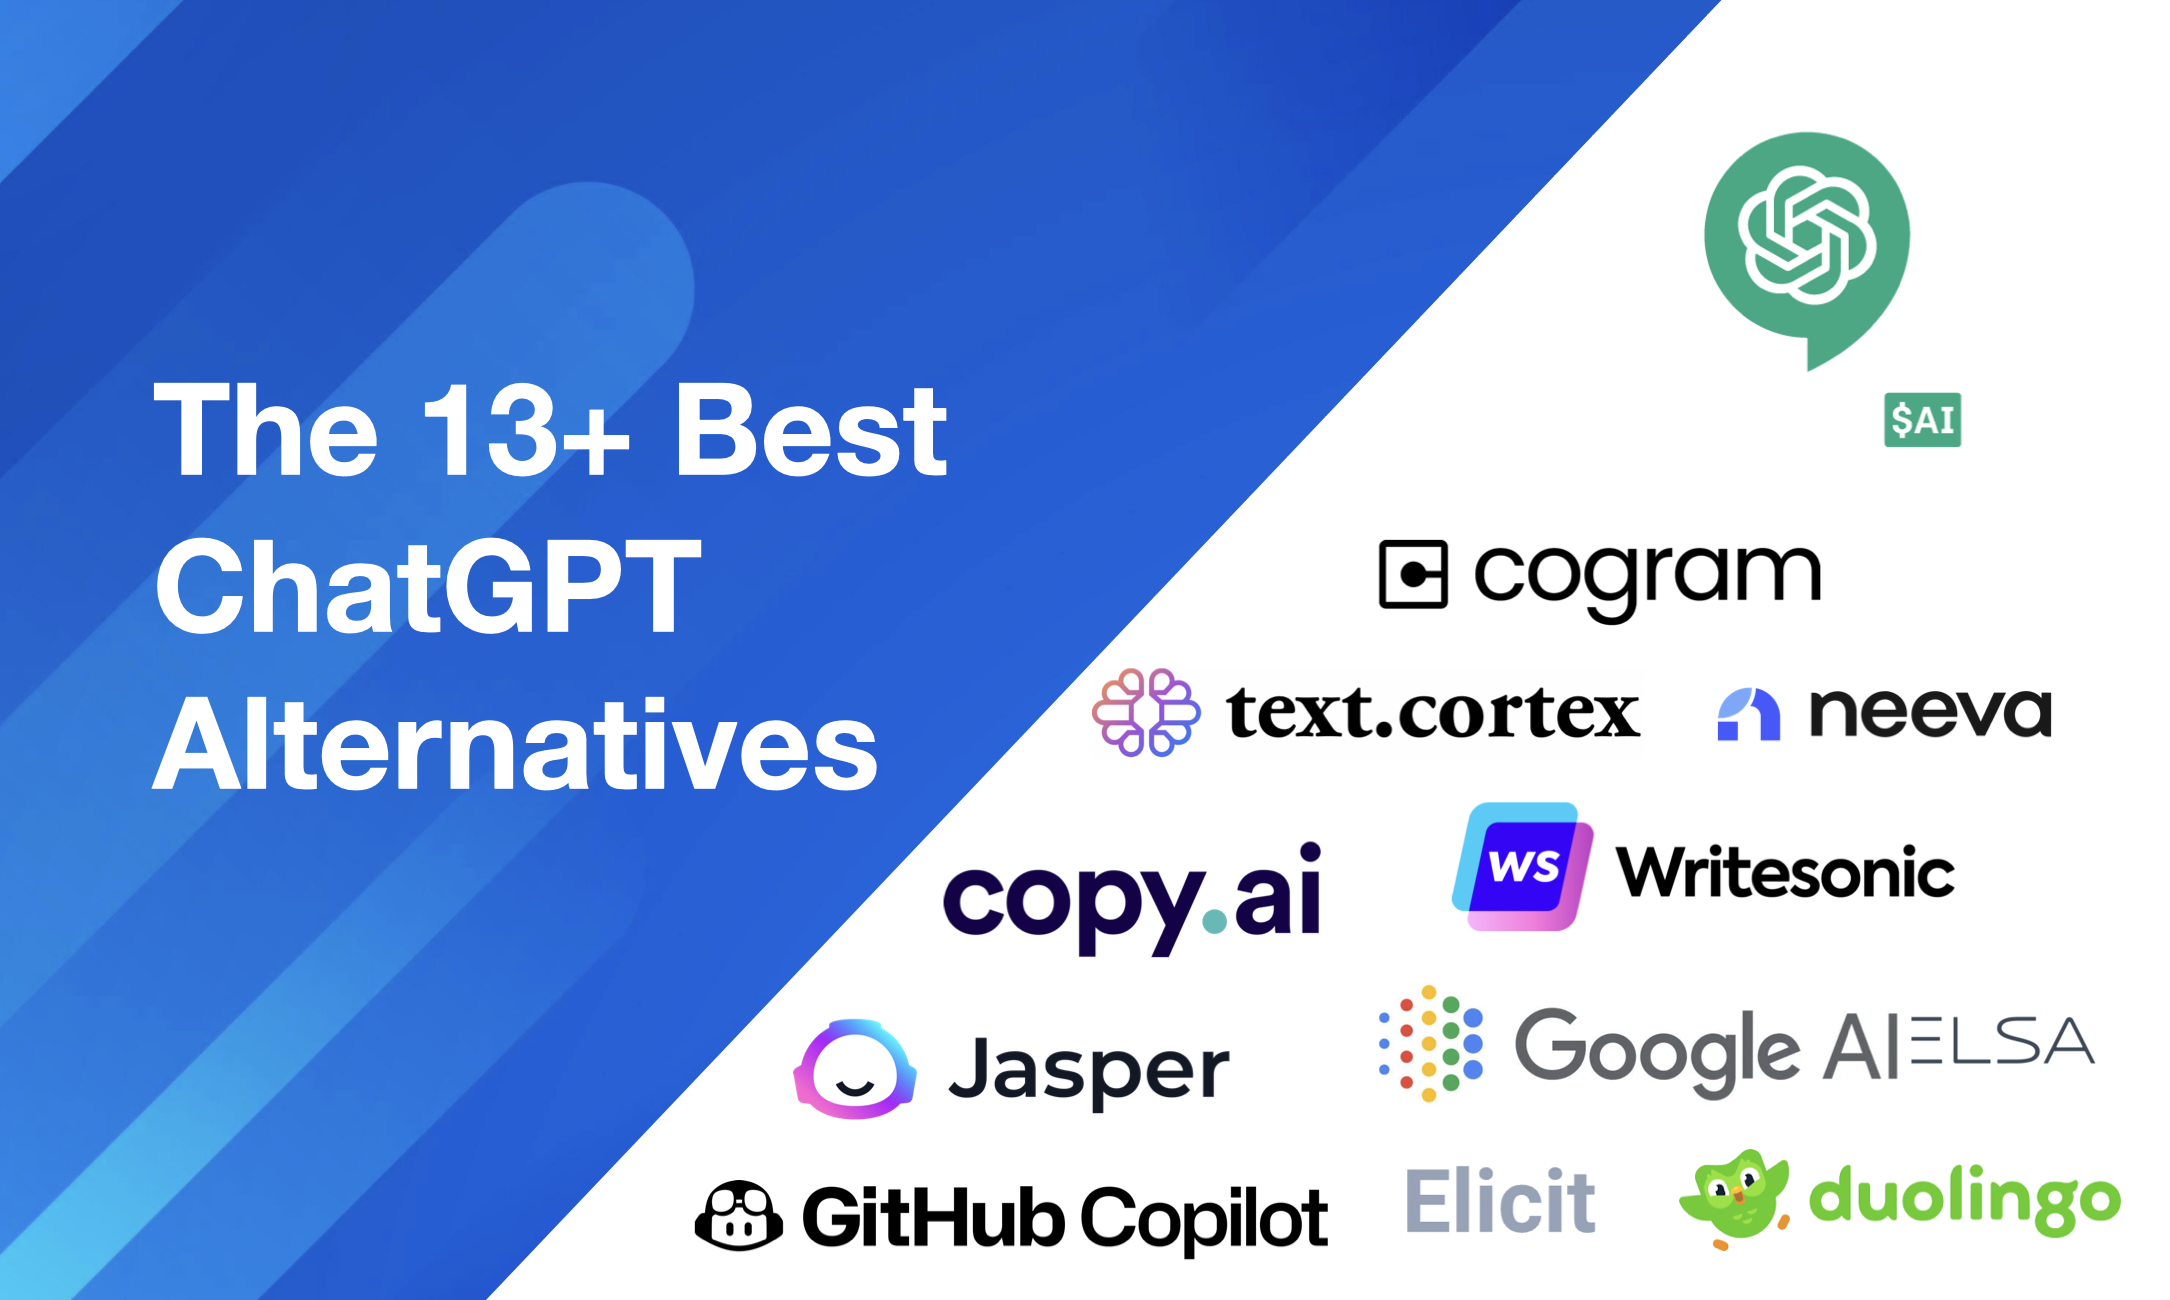 14+ Best ChatGPT Alternatives for Every Use Case [2023]